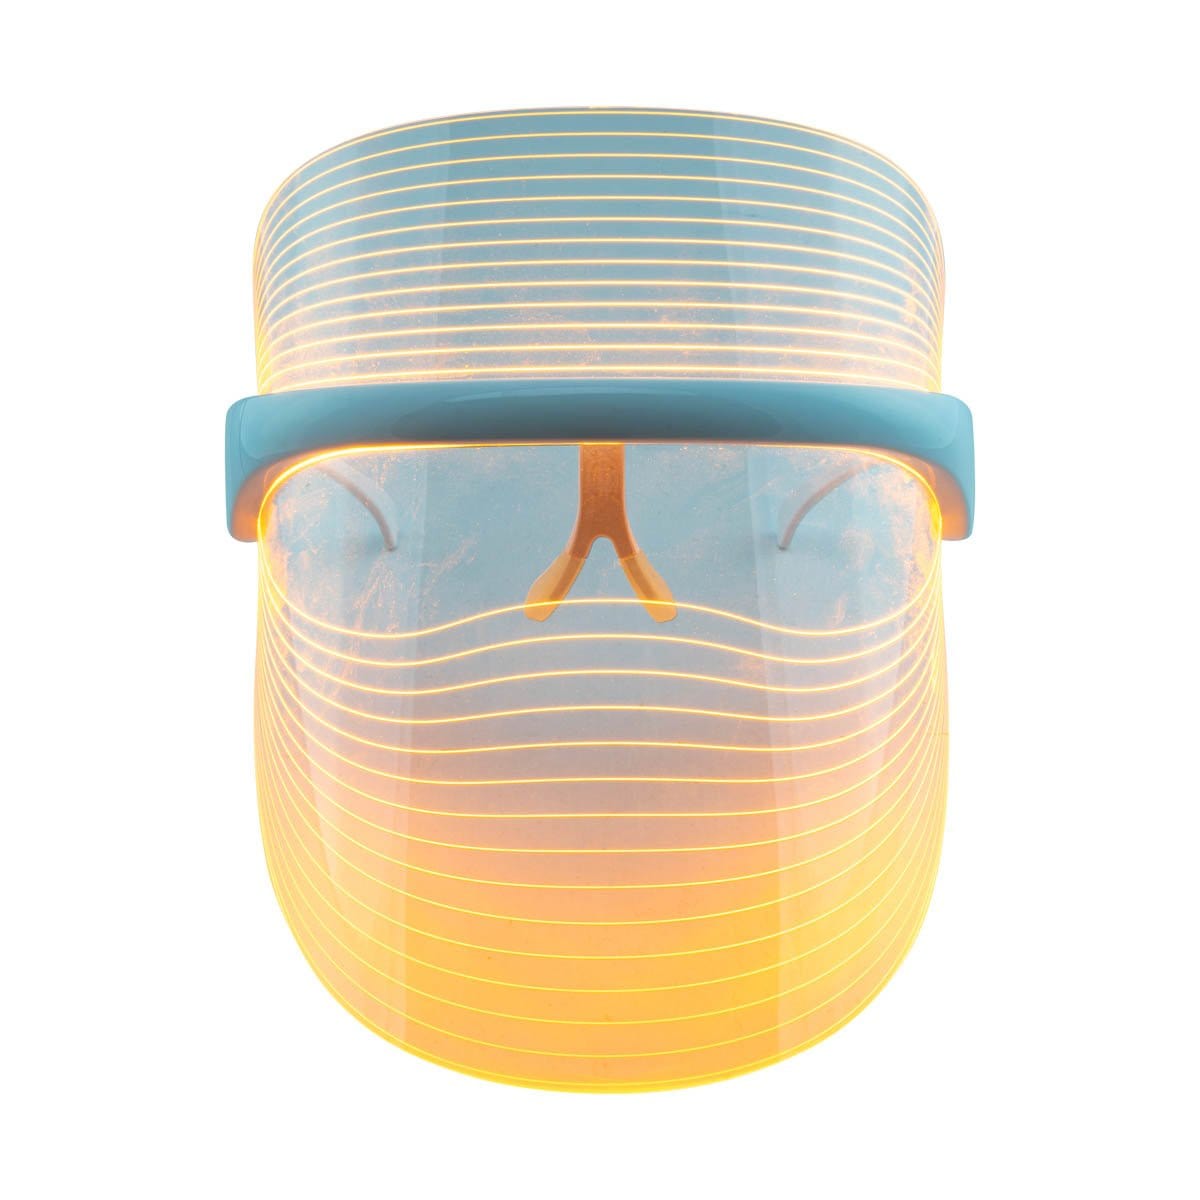  LED Light Therapy Face Shield